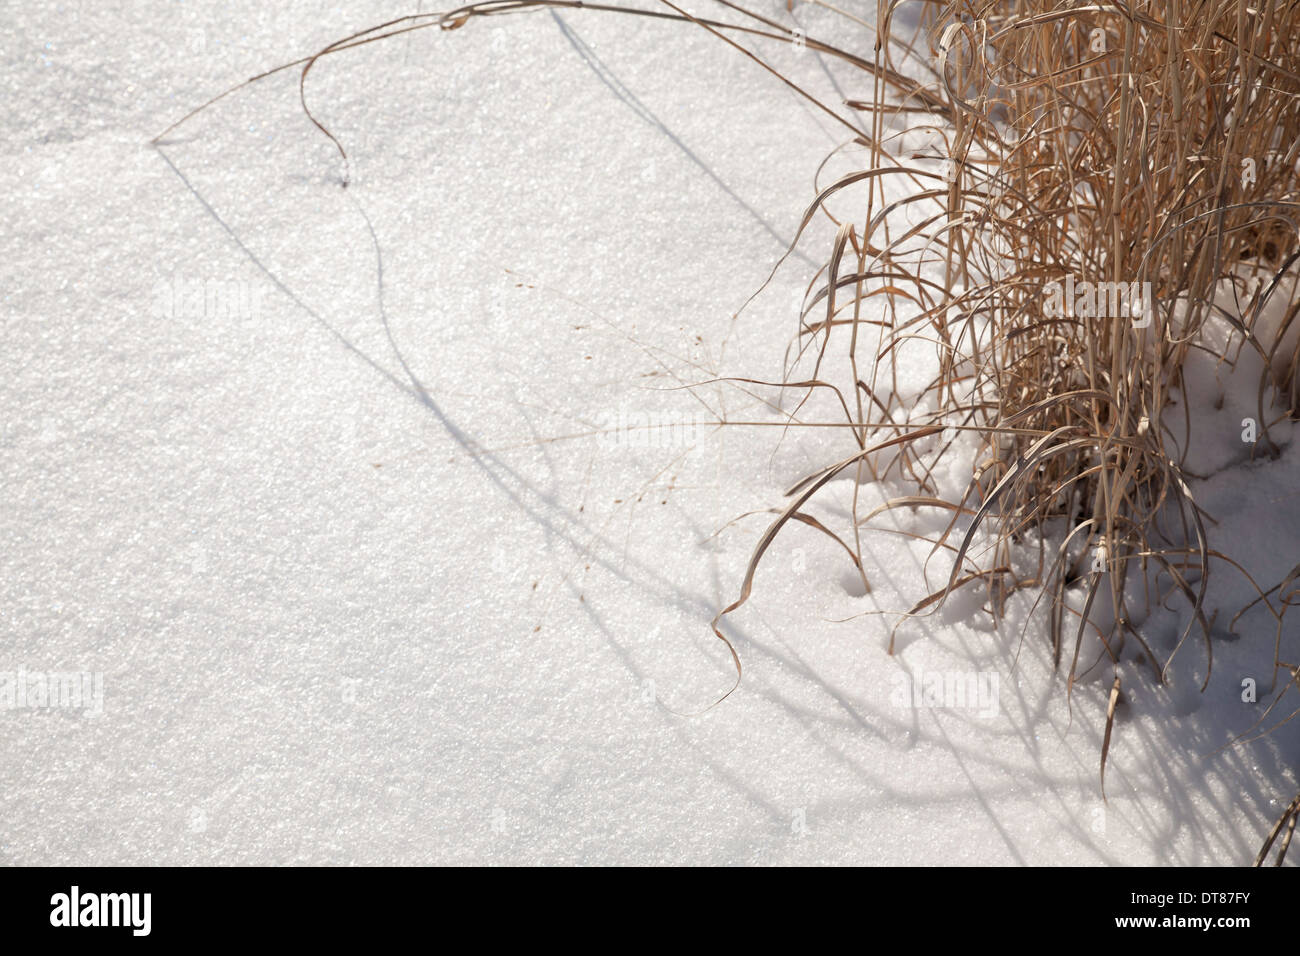 Grass protrudes through heave snow in the afternoon. Stock Photo